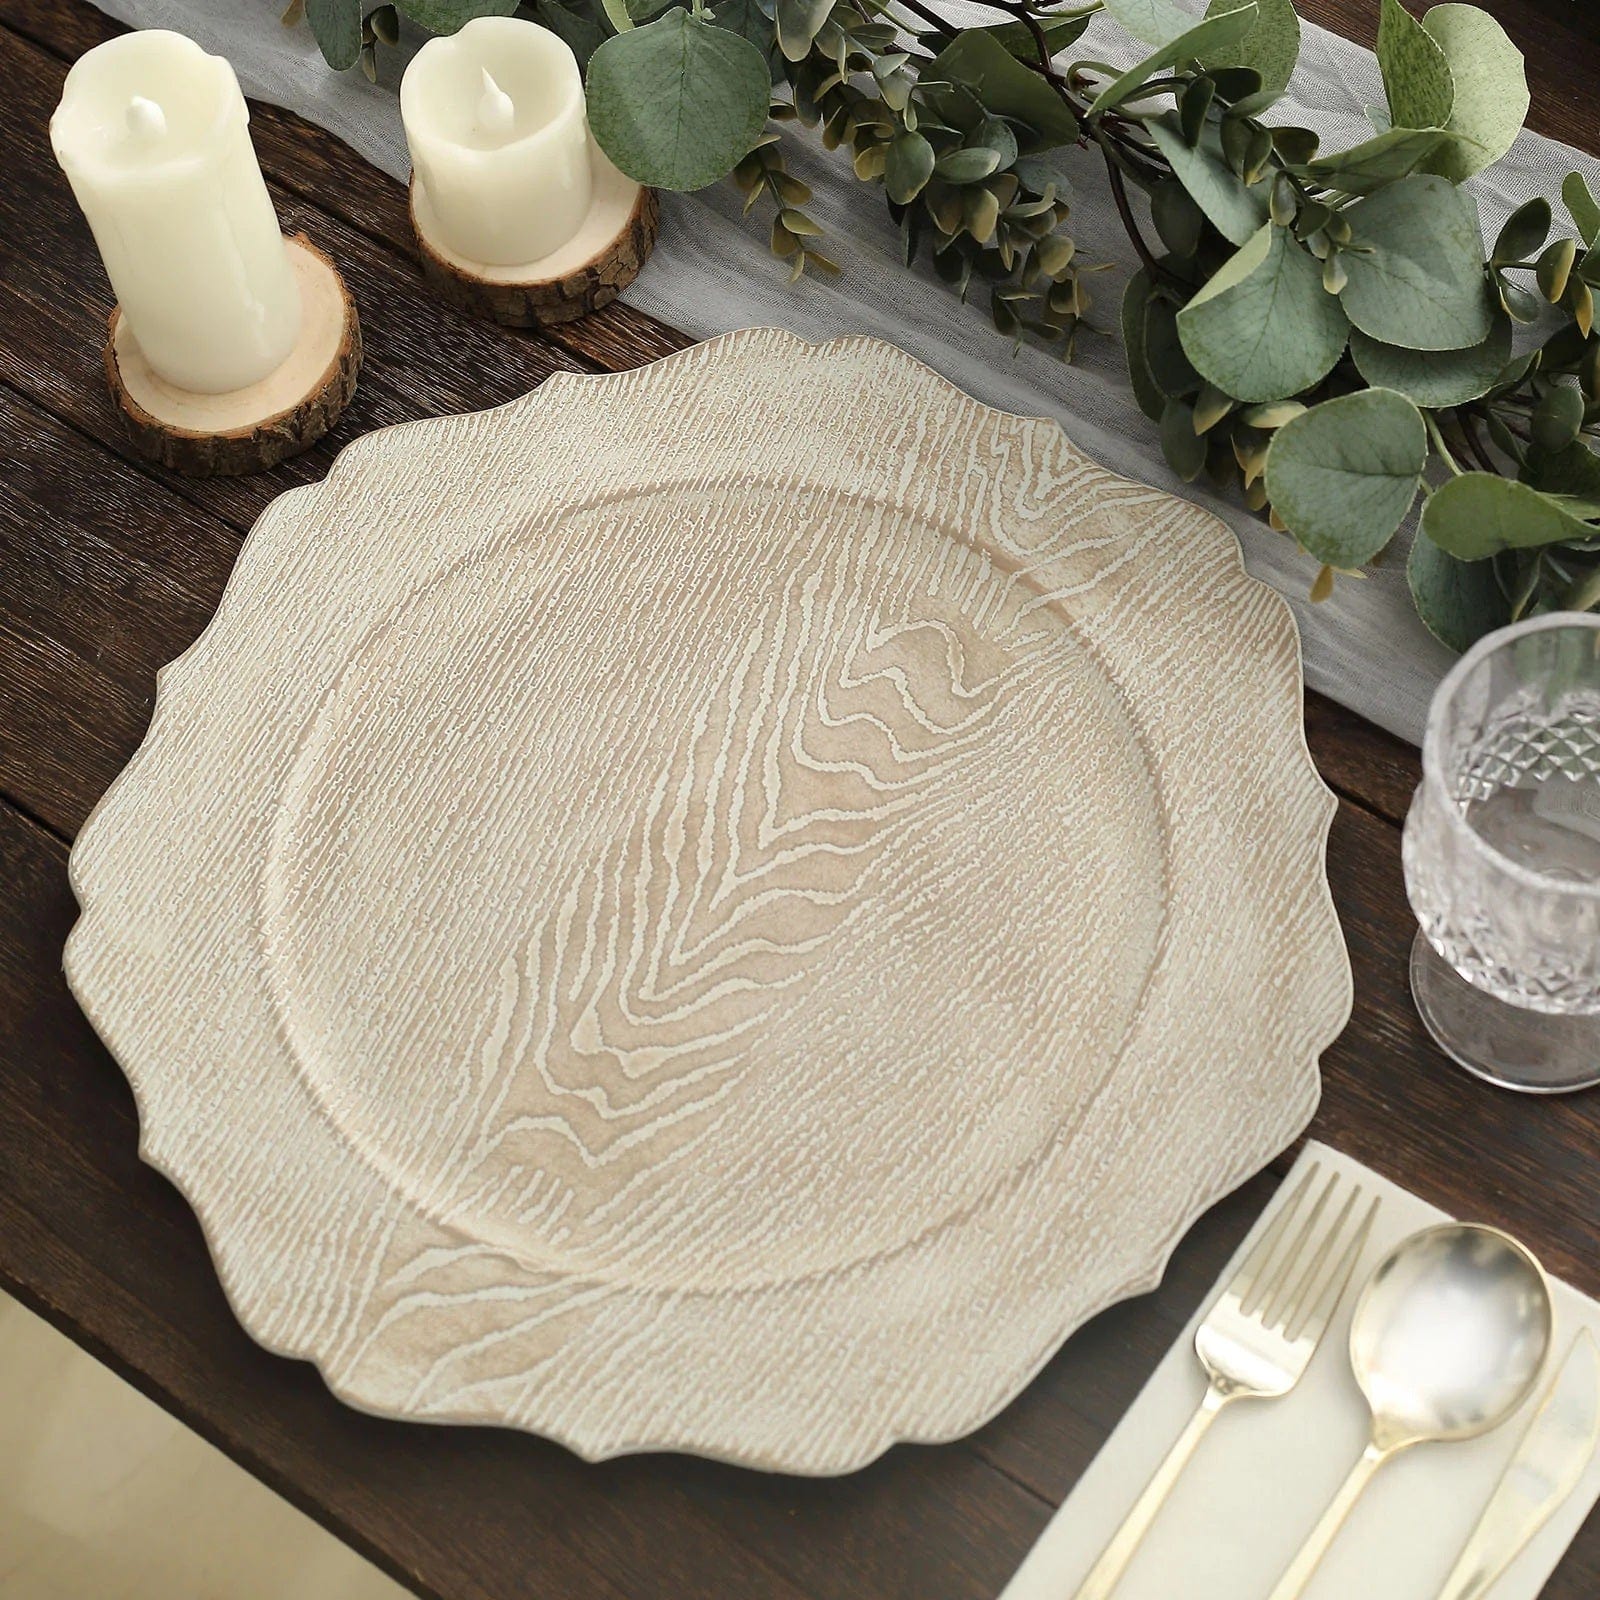 6 Rustic 13 in Wooden Round Acrylic Charger Plates with Scalloped Trim